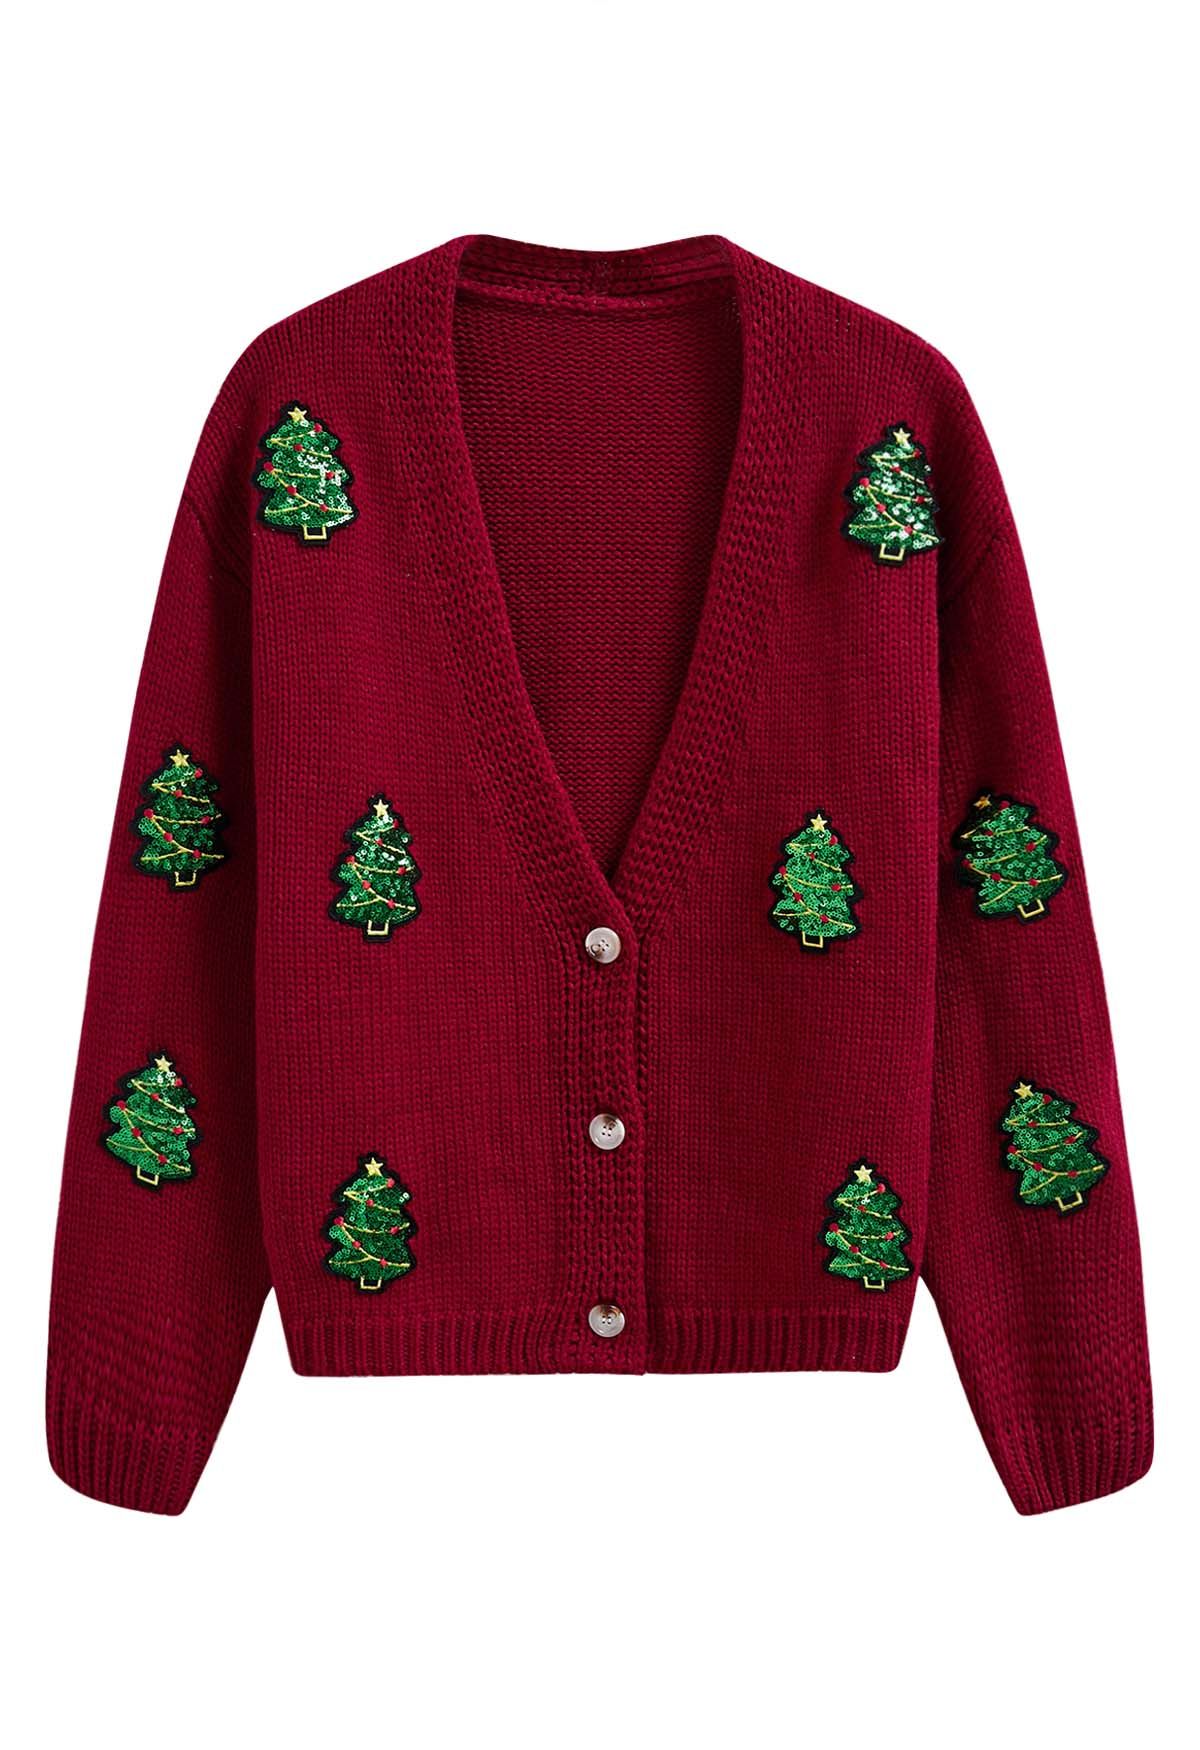 Sequin Christmas Tree Patch Button-Up Cardigan in Red